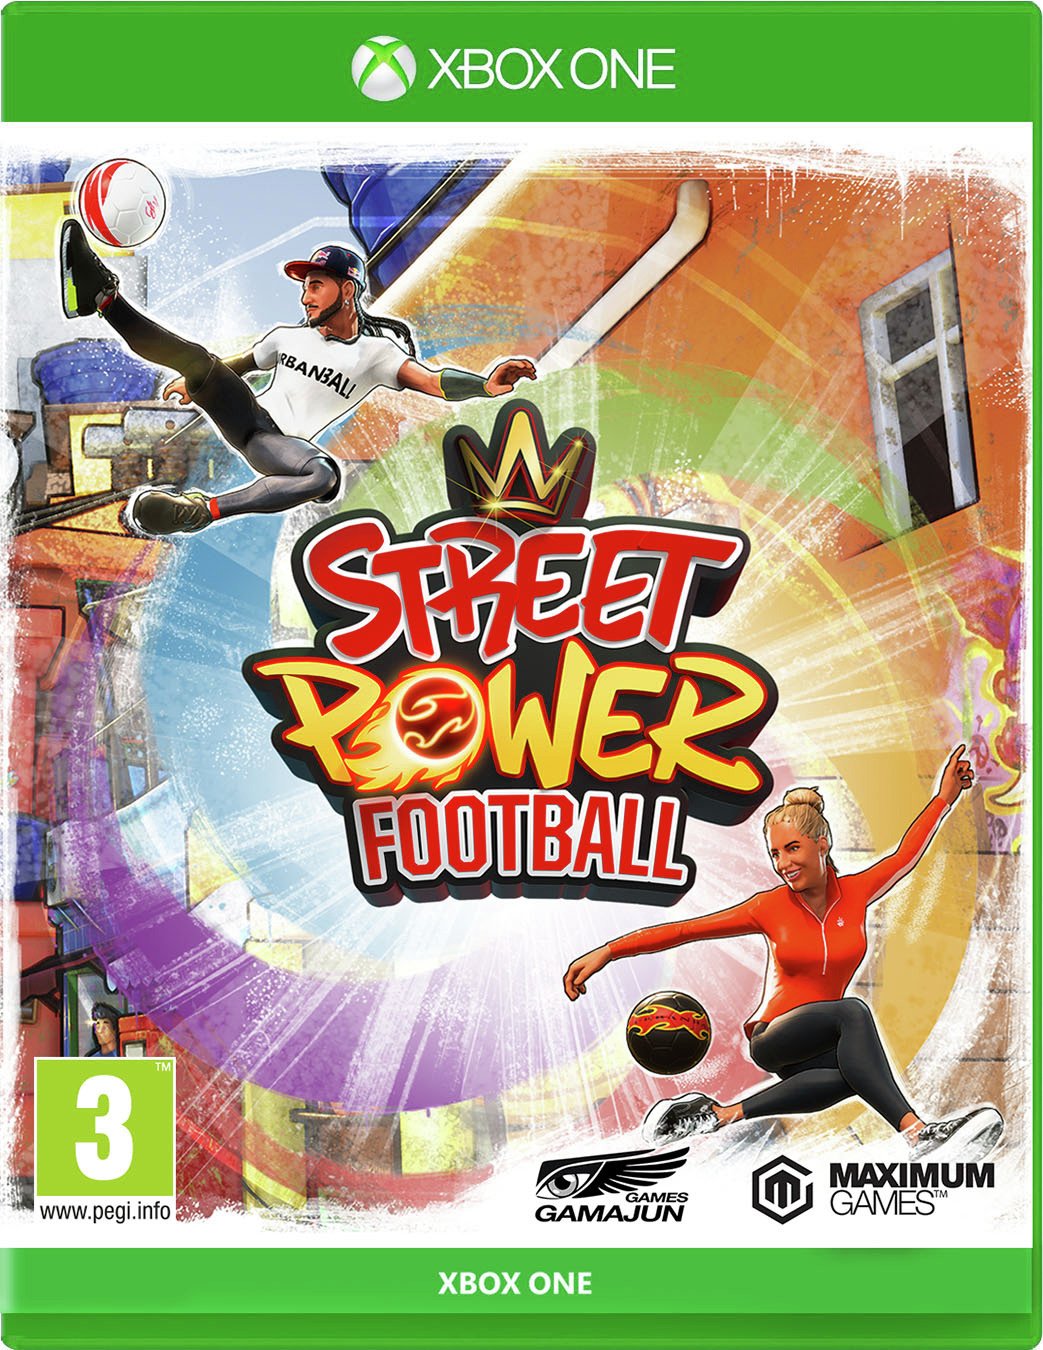 Street Power Football Xbox One Game Pre-Order Review